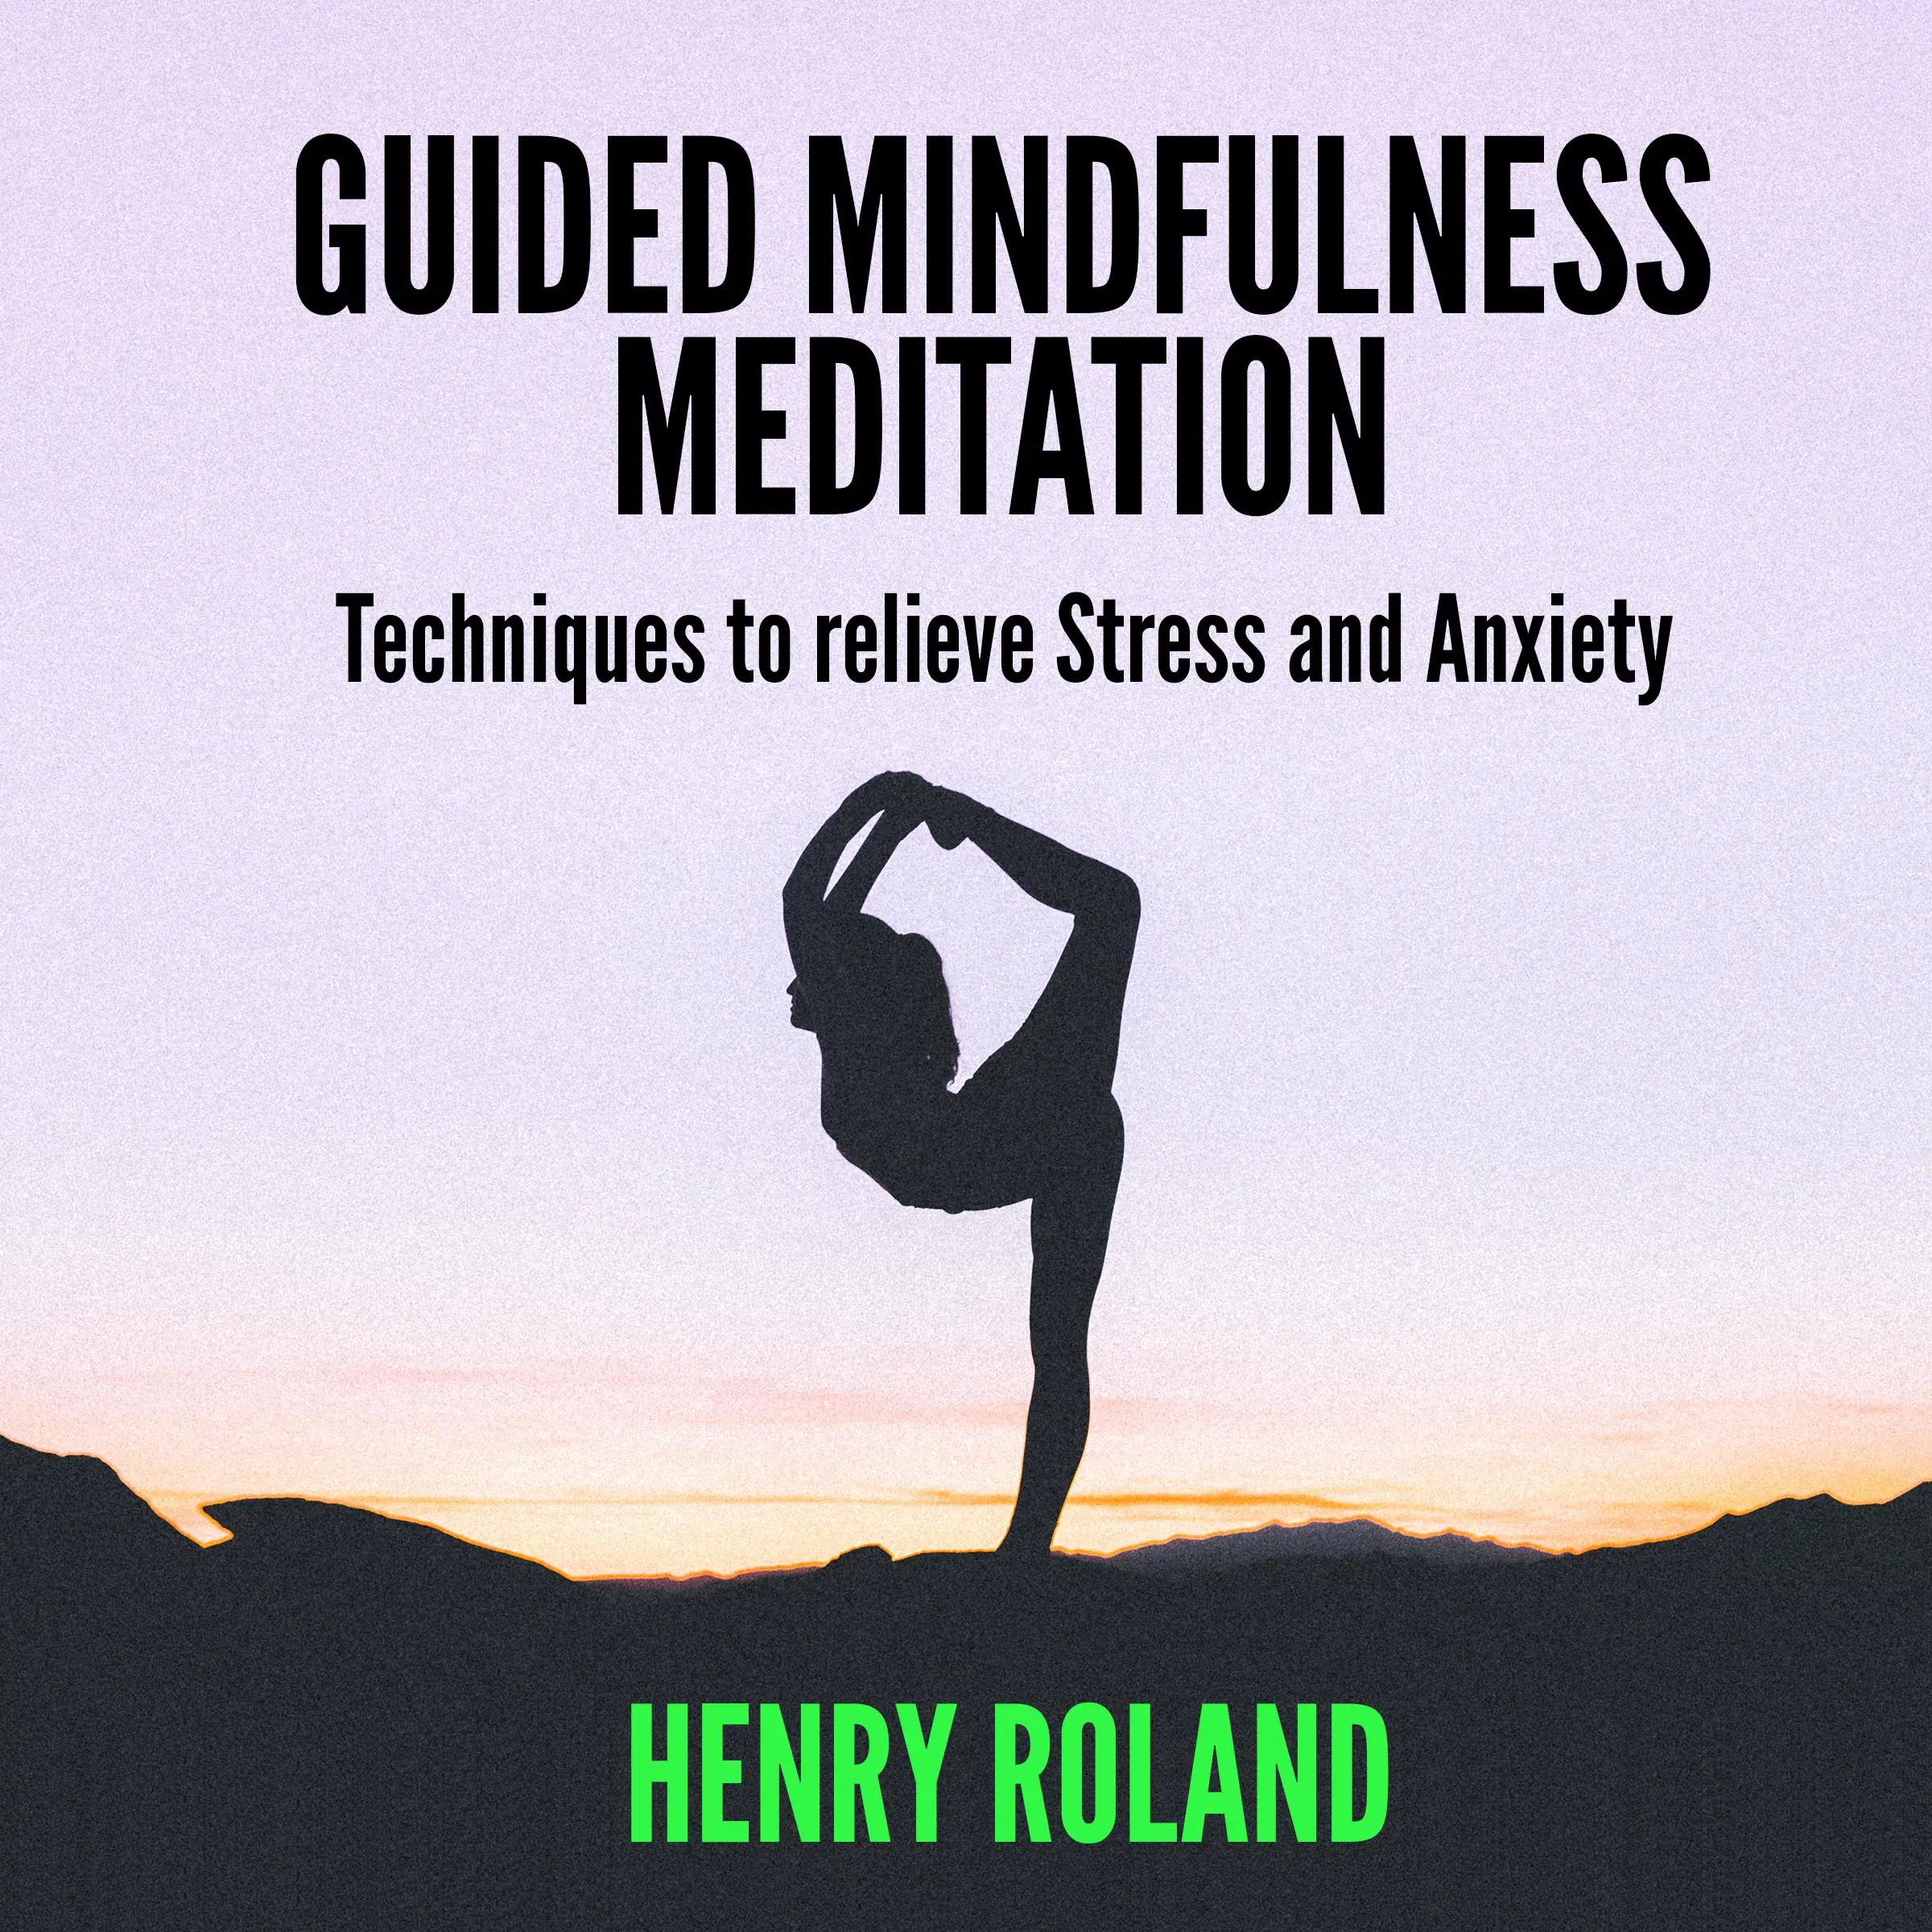 Guided Mindfulness Meditation:  Techniques to Relieve Stress and Anxiety Audiobook by Henry Roland